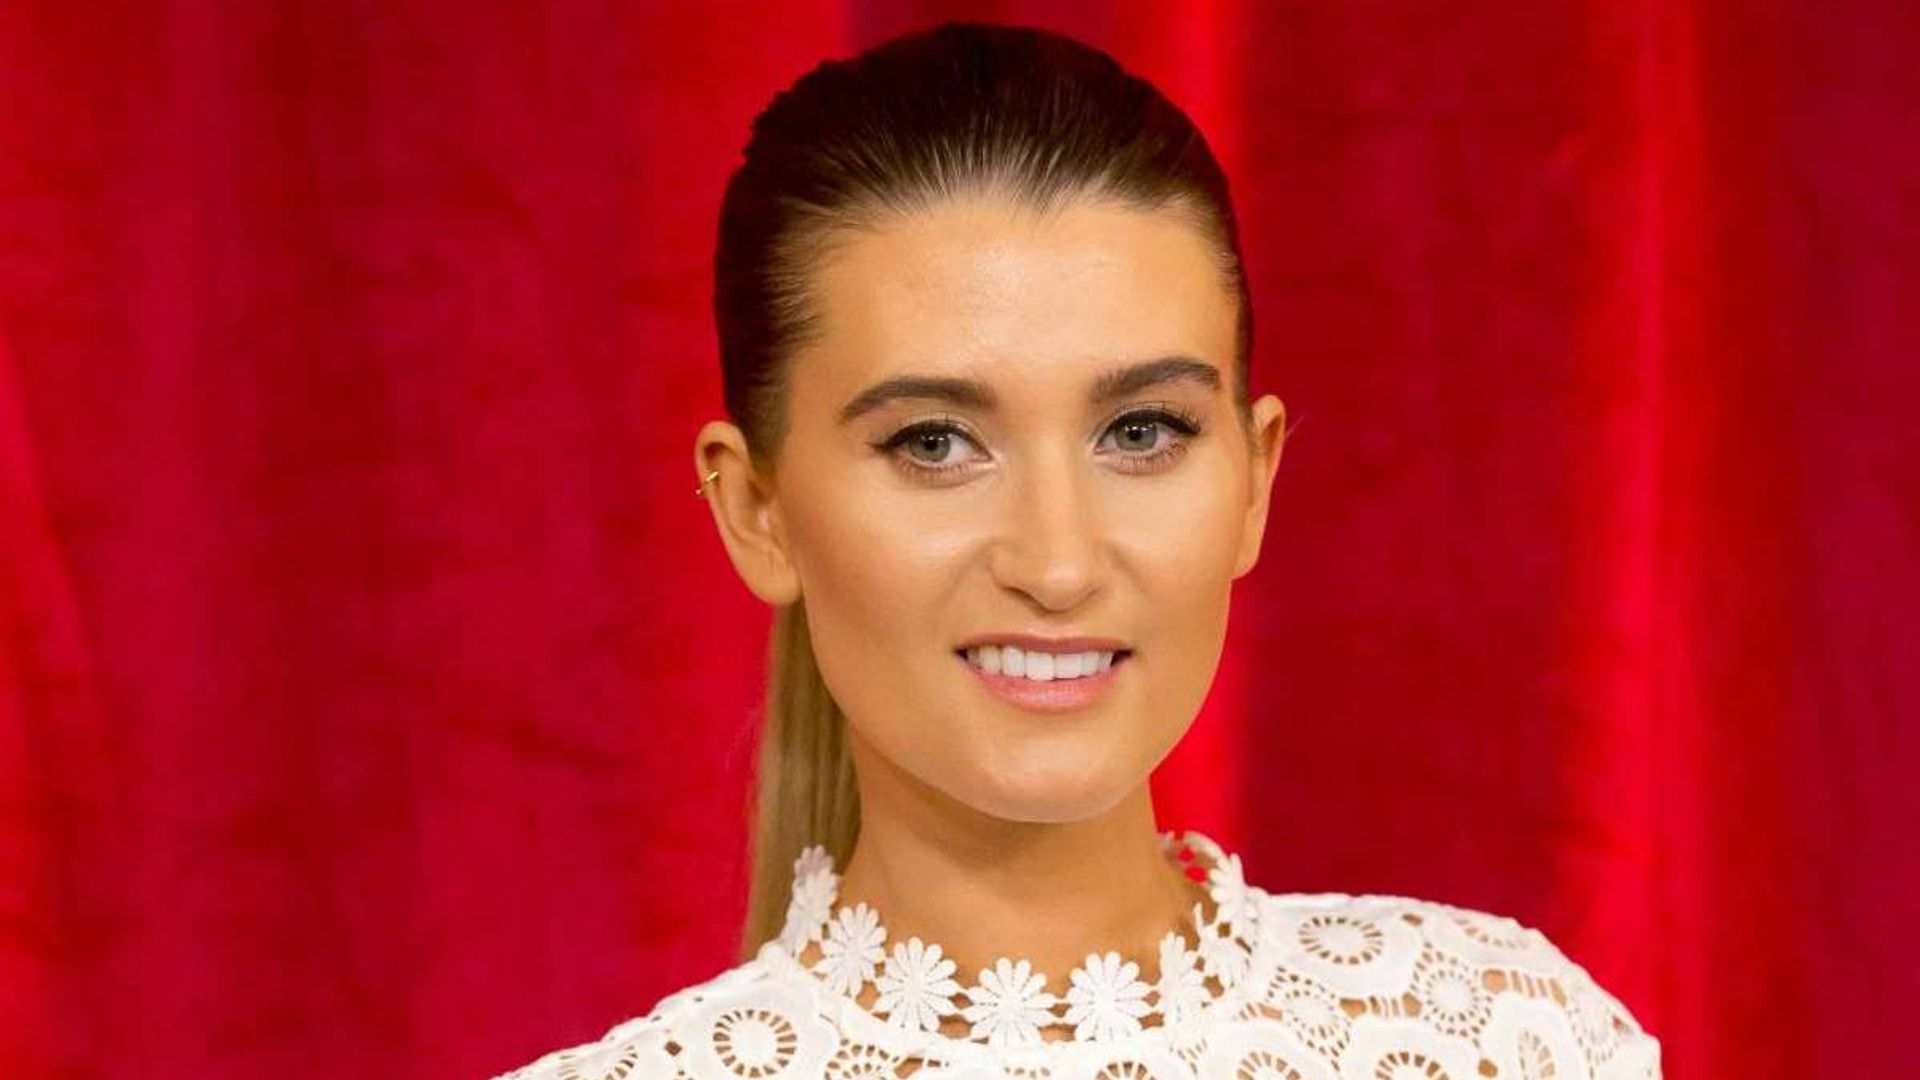 Charley Webb shares rare behind-the-scenes photo from surprise wedding